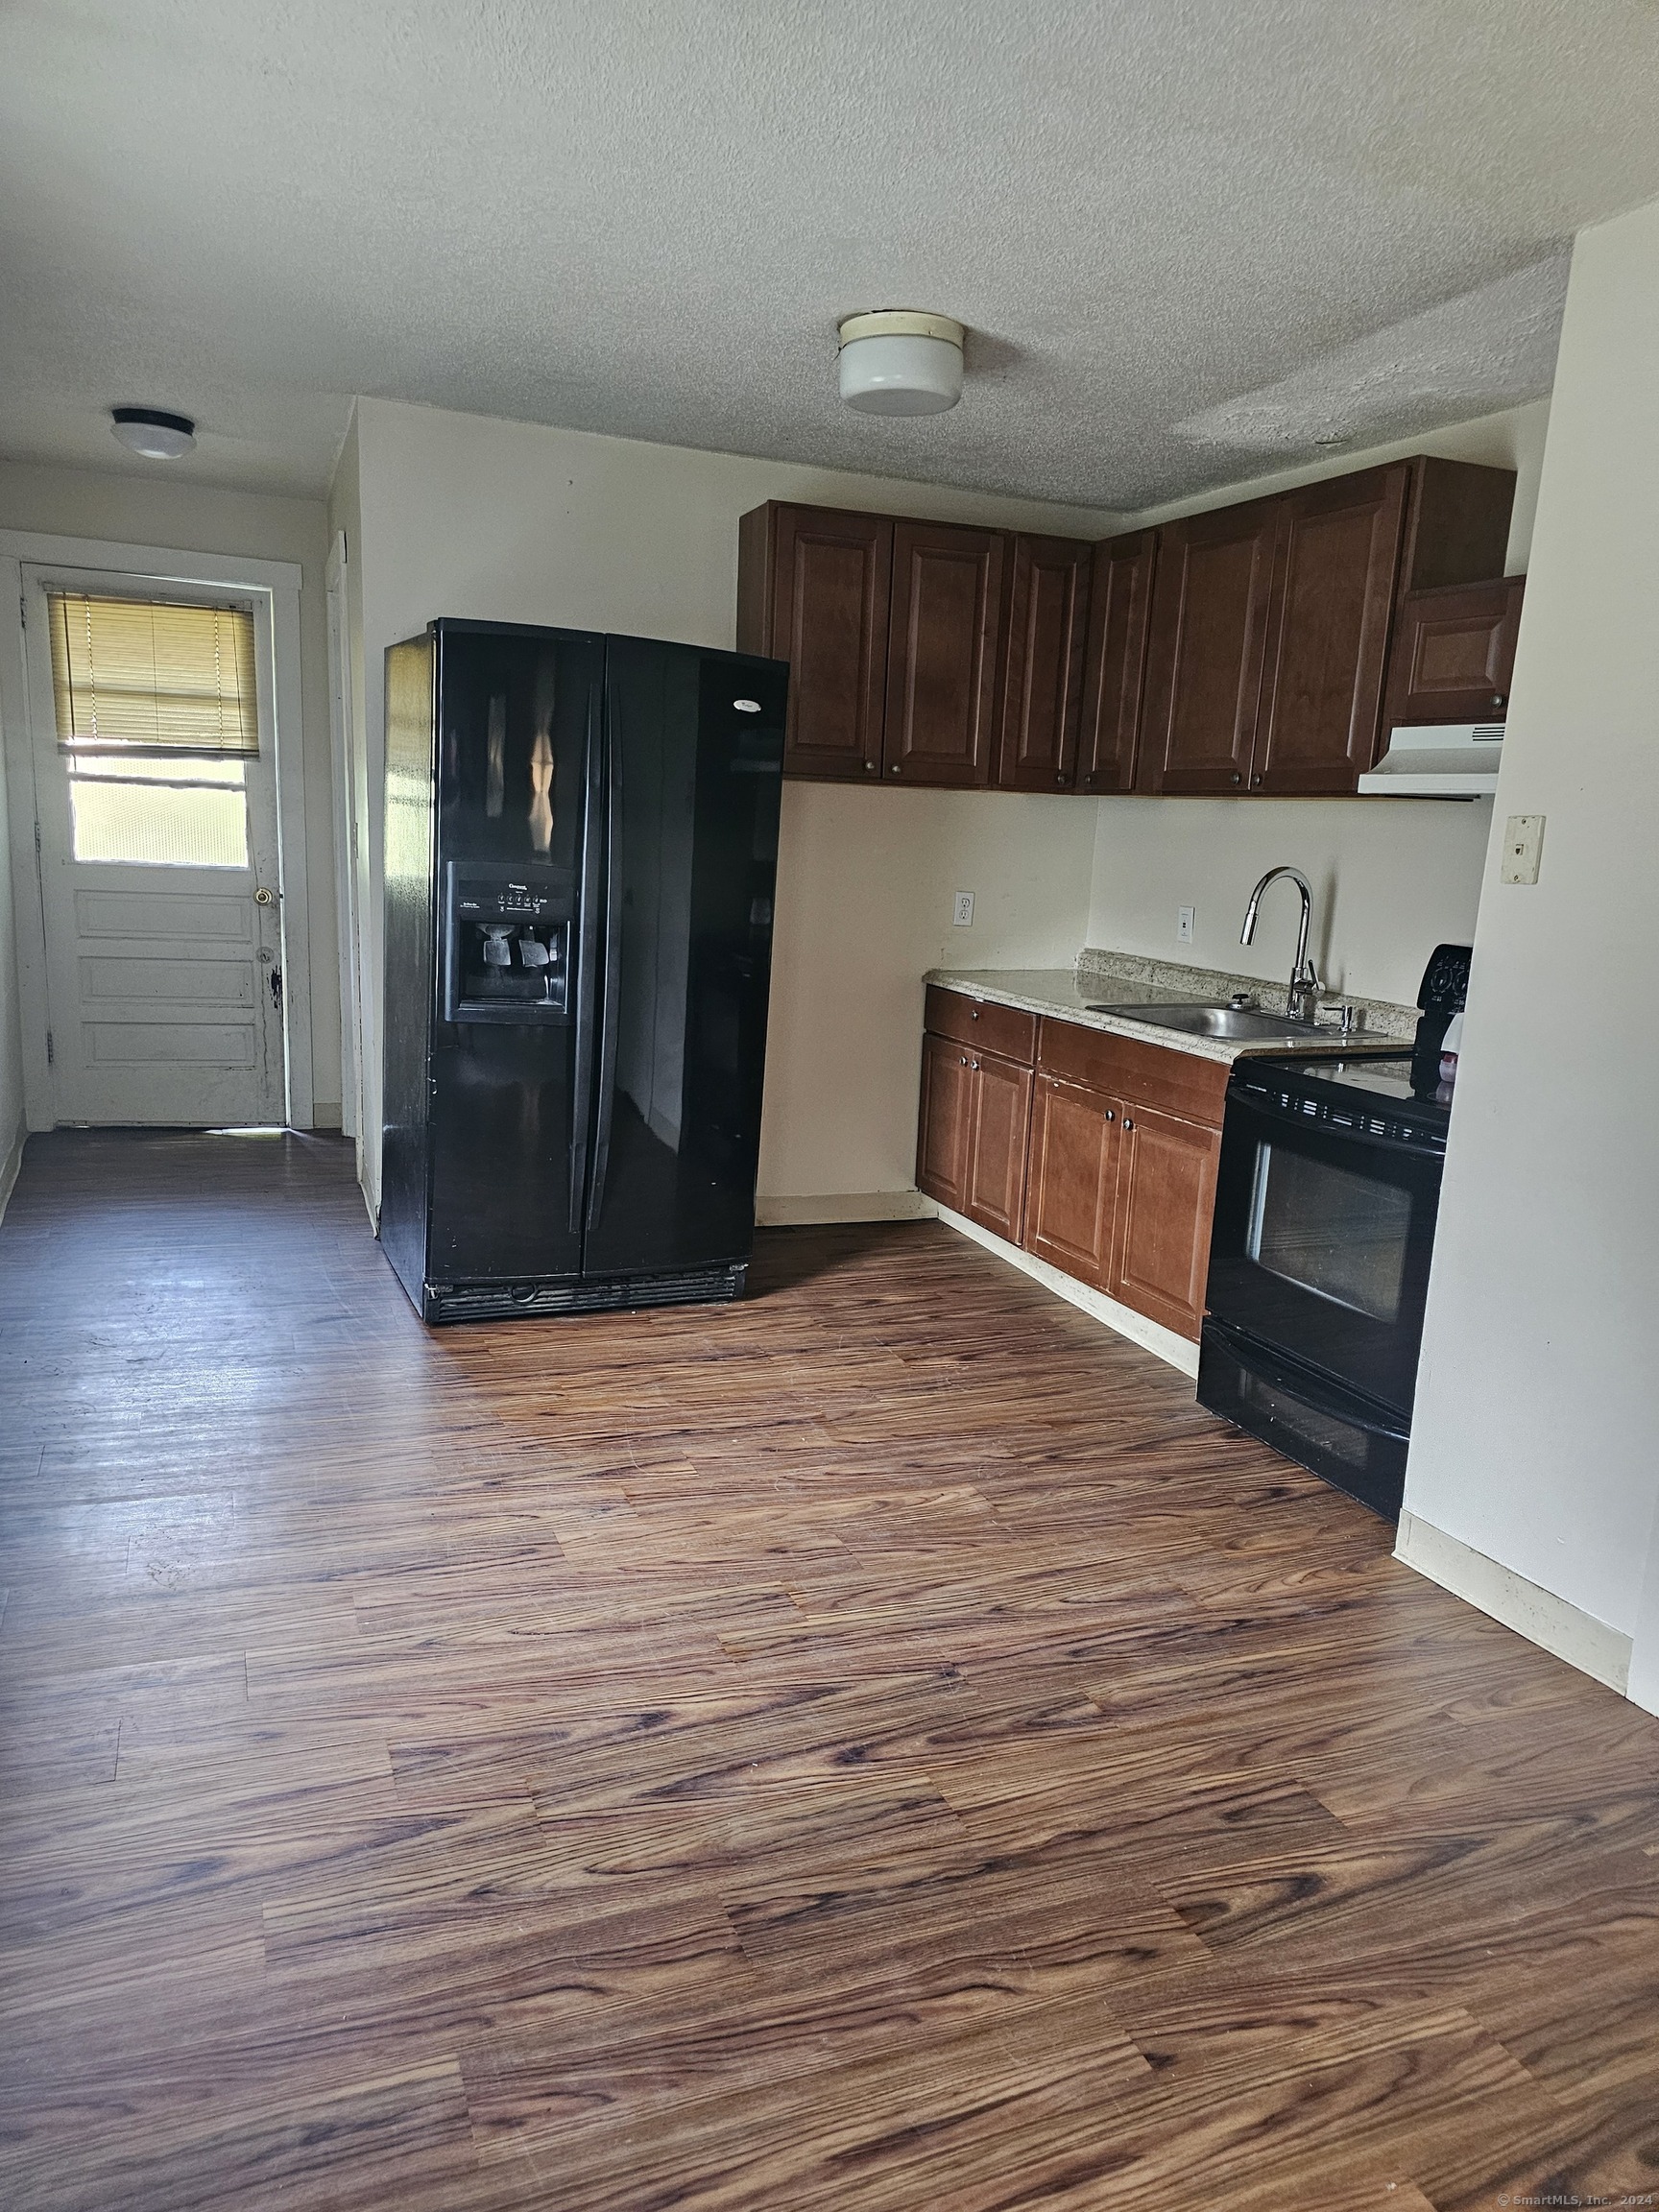 Rental Property at 83 Birch Street, Windham, Connecticut - Bedrooms: 5 
Bathrooms: 3 
Rooms: 10  - $1,500 MO.